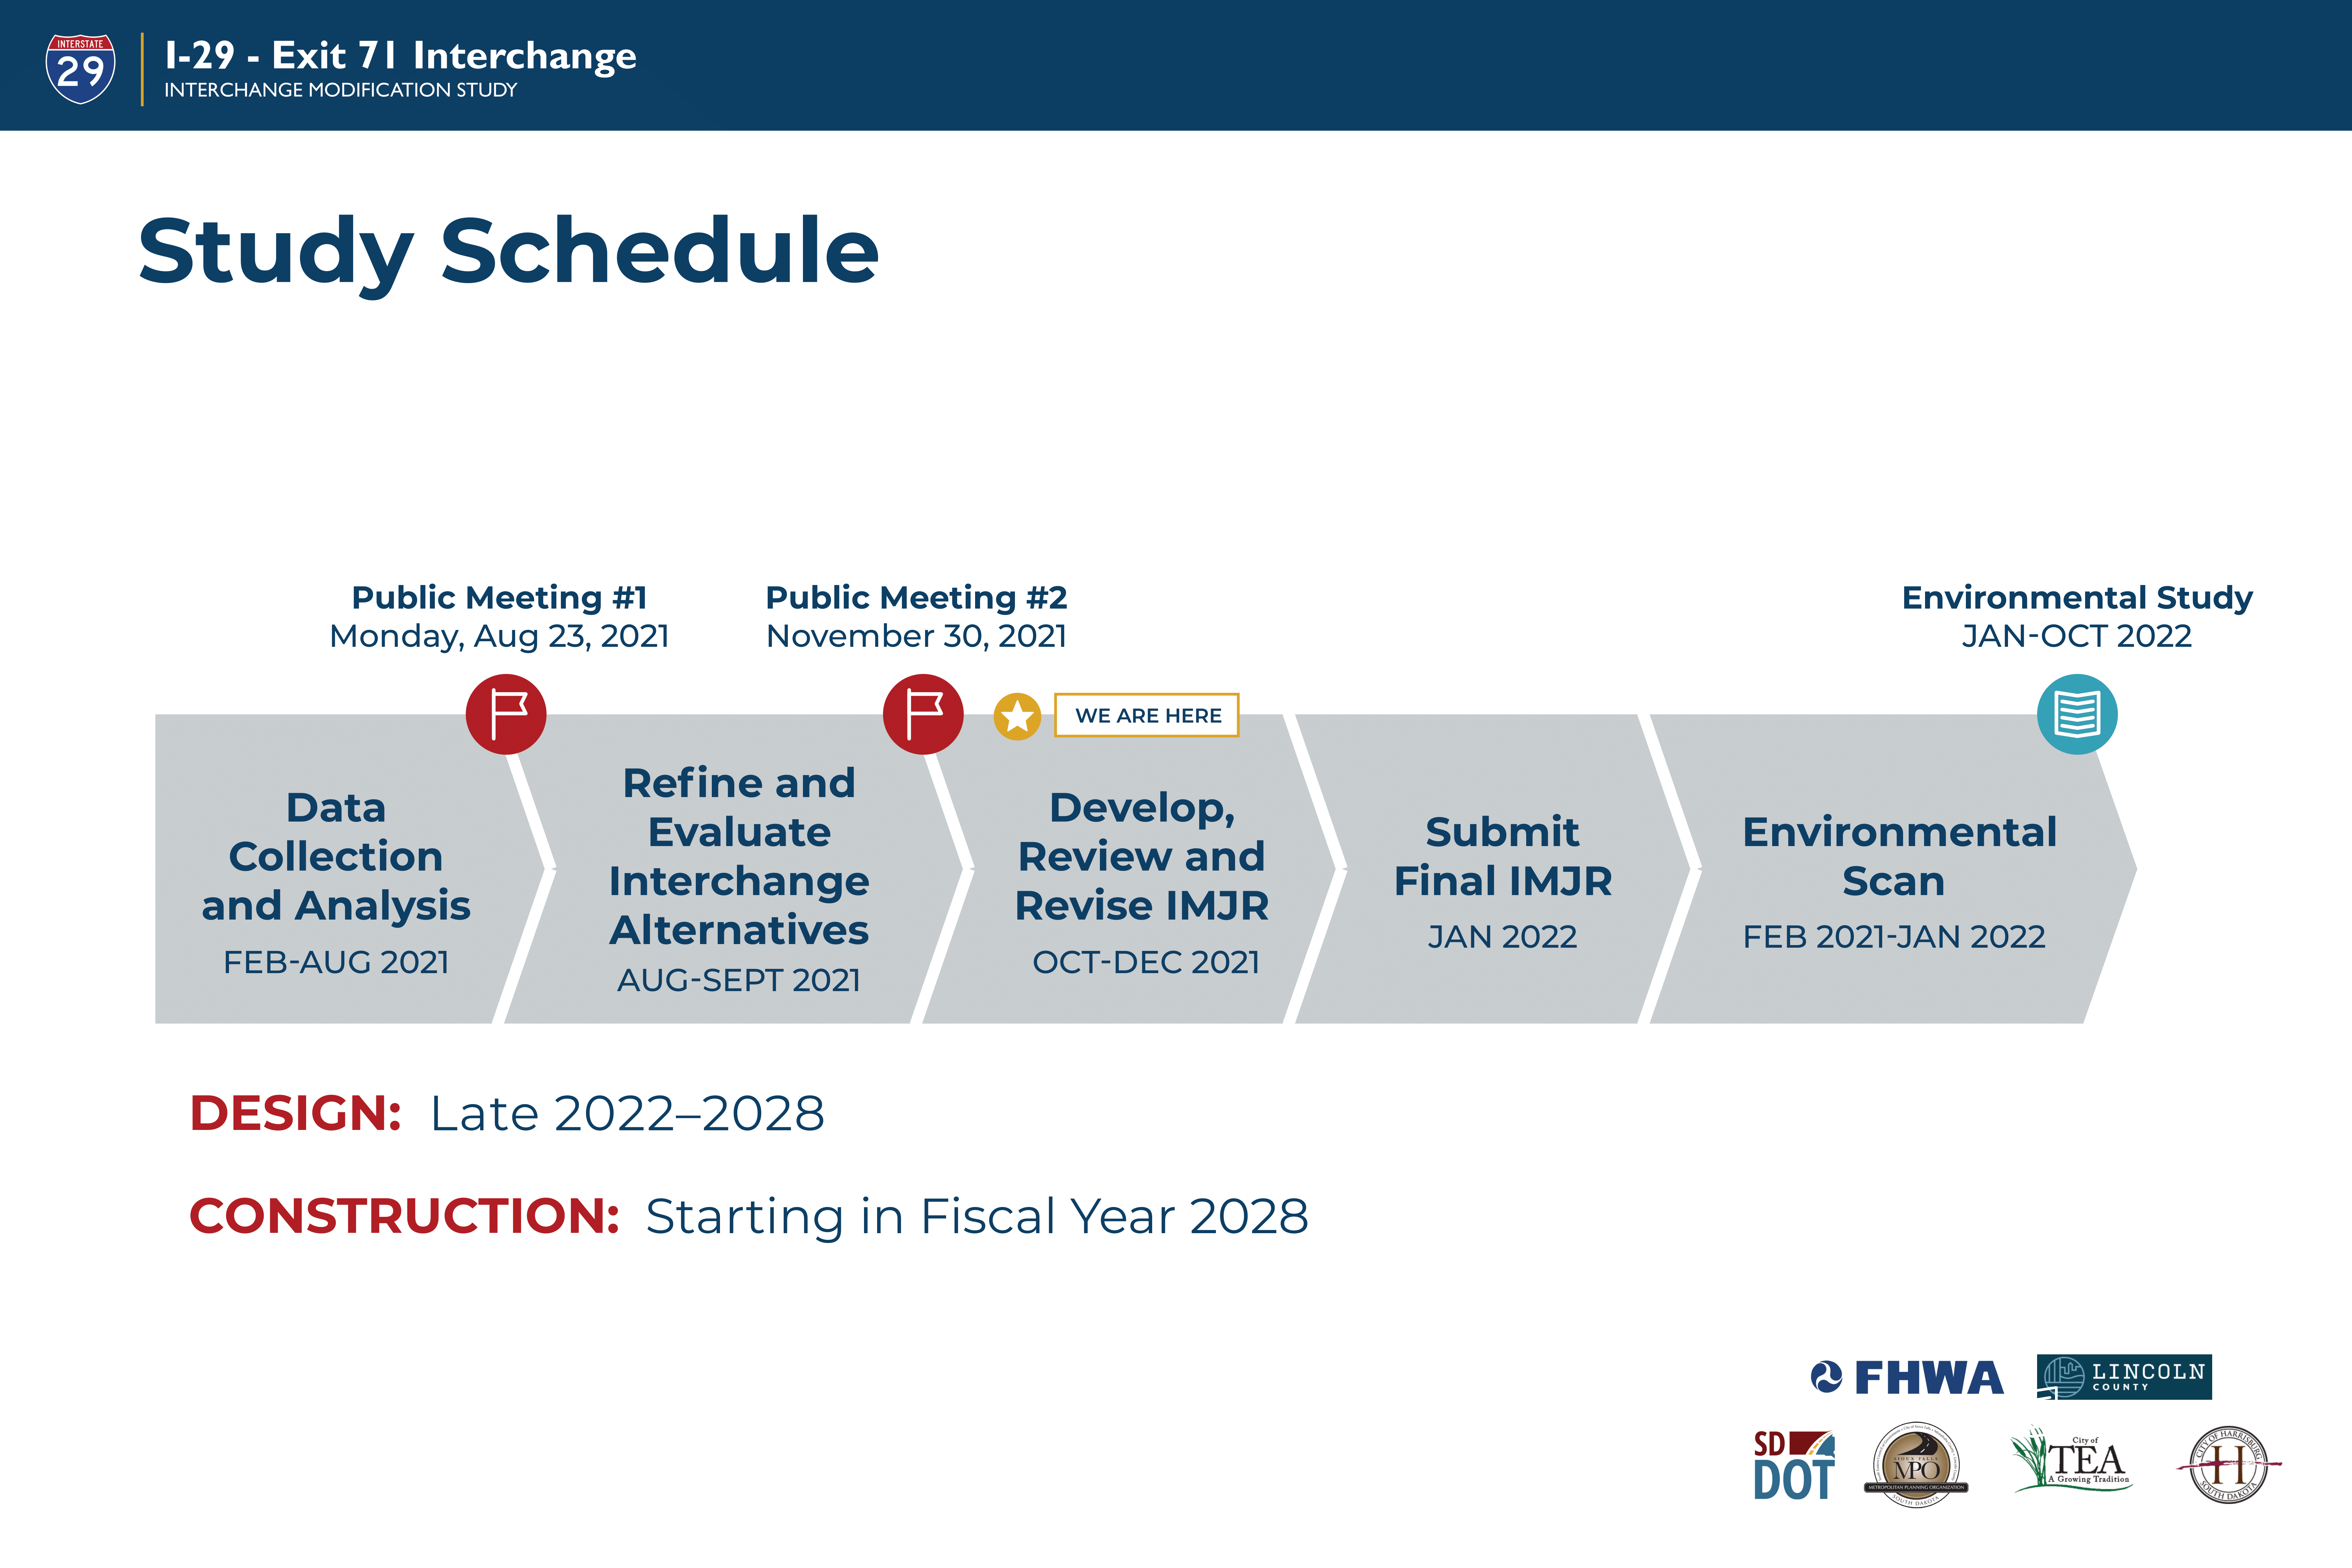 The study schedule shows the anticipated pace of the project. Data collection and analysis will take place from February 2021 to August 2021 with Public Meeting #1 taking place on Monday, August 23, 2021. The interchange alternatives will be refined and evaluated from August 2021 to September 2021 with Public Meeting #2 taking place shortly after this process is completed. The IMJR will be developed, reviewed, and revised in October through December of 2021. The final IMJR will be submitted in January 2022. An environmental scan will be conducted from February 2021 to January 2022 and the subsequent environmental an environmental study from January to October 2022. 